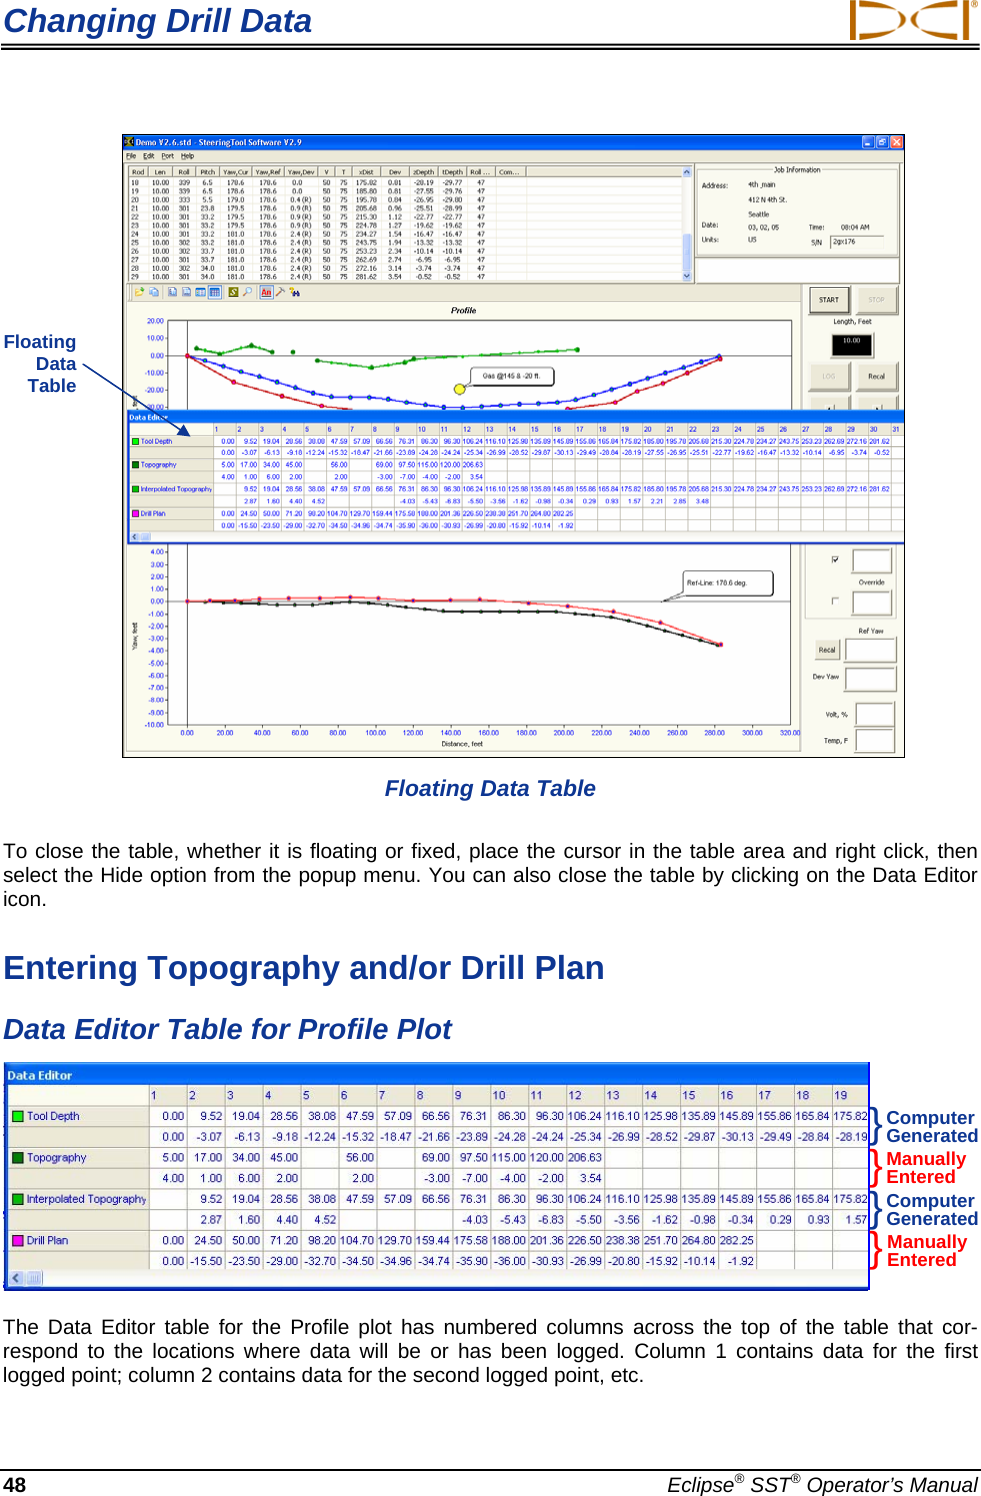 Changing Drill Data  48  Eclipse® SST® Operator’s Manual           Floating Data Table  To close the table, whether it is floating or fixed, place the cursor in the table area and right click, then select the Hide option from the popup menu. You can also close the table by clicking on the Data Editor icon. Entering Topography and/or Drill Plan Data Editor Table for Profile Plot  The Data Editor table for the Profile plot has numbered columns across the top of the table that cor-respond to the locations where data will be or has been logged. Column 1 contains data for the first logged point; column 2 contains data for the second logged point, etc.  Floating  Data  Table Computer Generated }}}}Manually Entered Computer Generated Manually Entered 